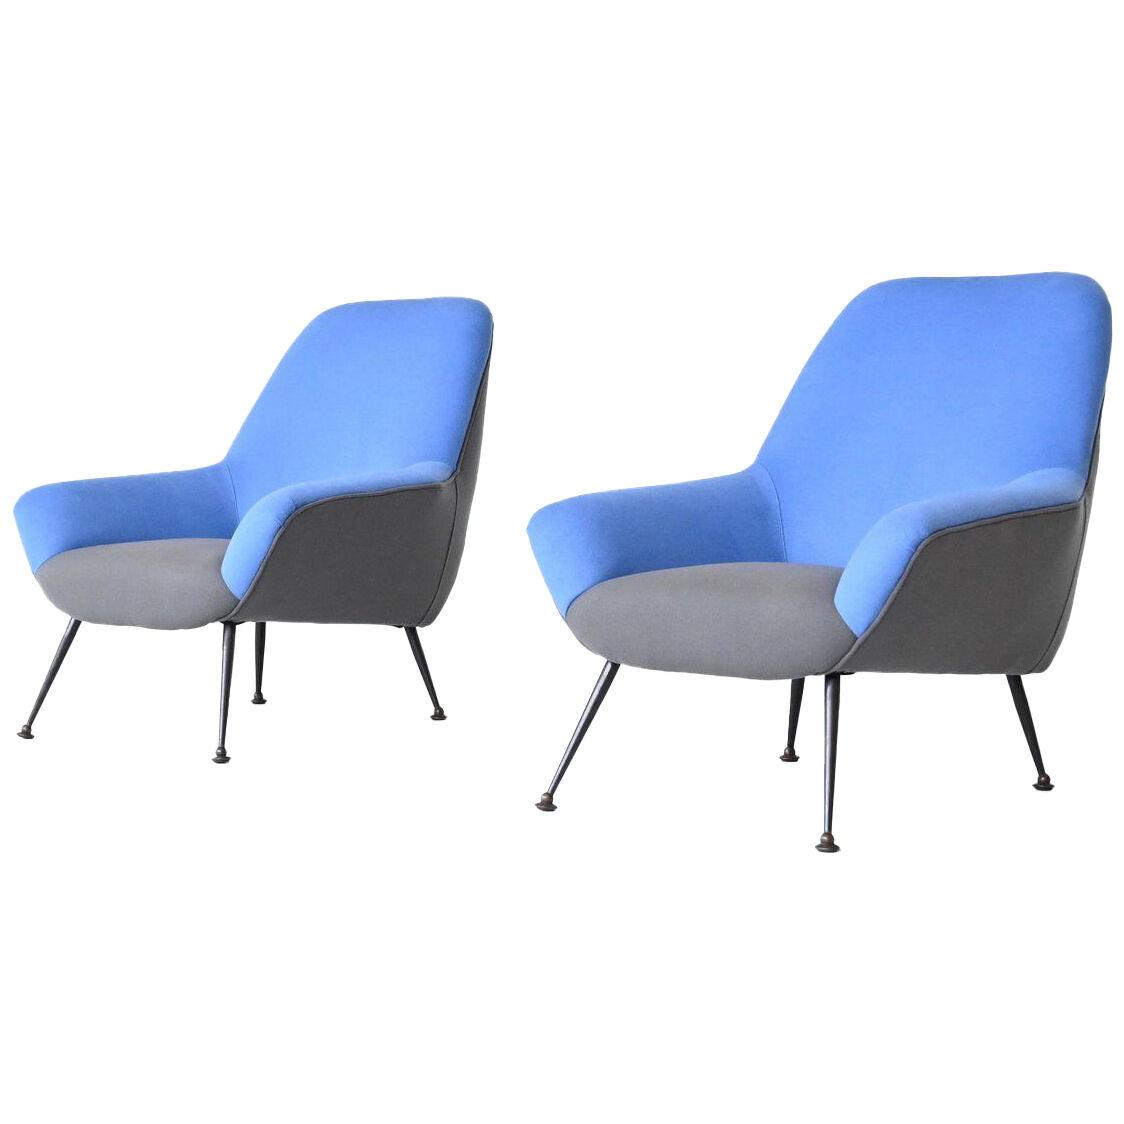 Italian pair of lounge chairs in blue and grey felt wool Italy 1950